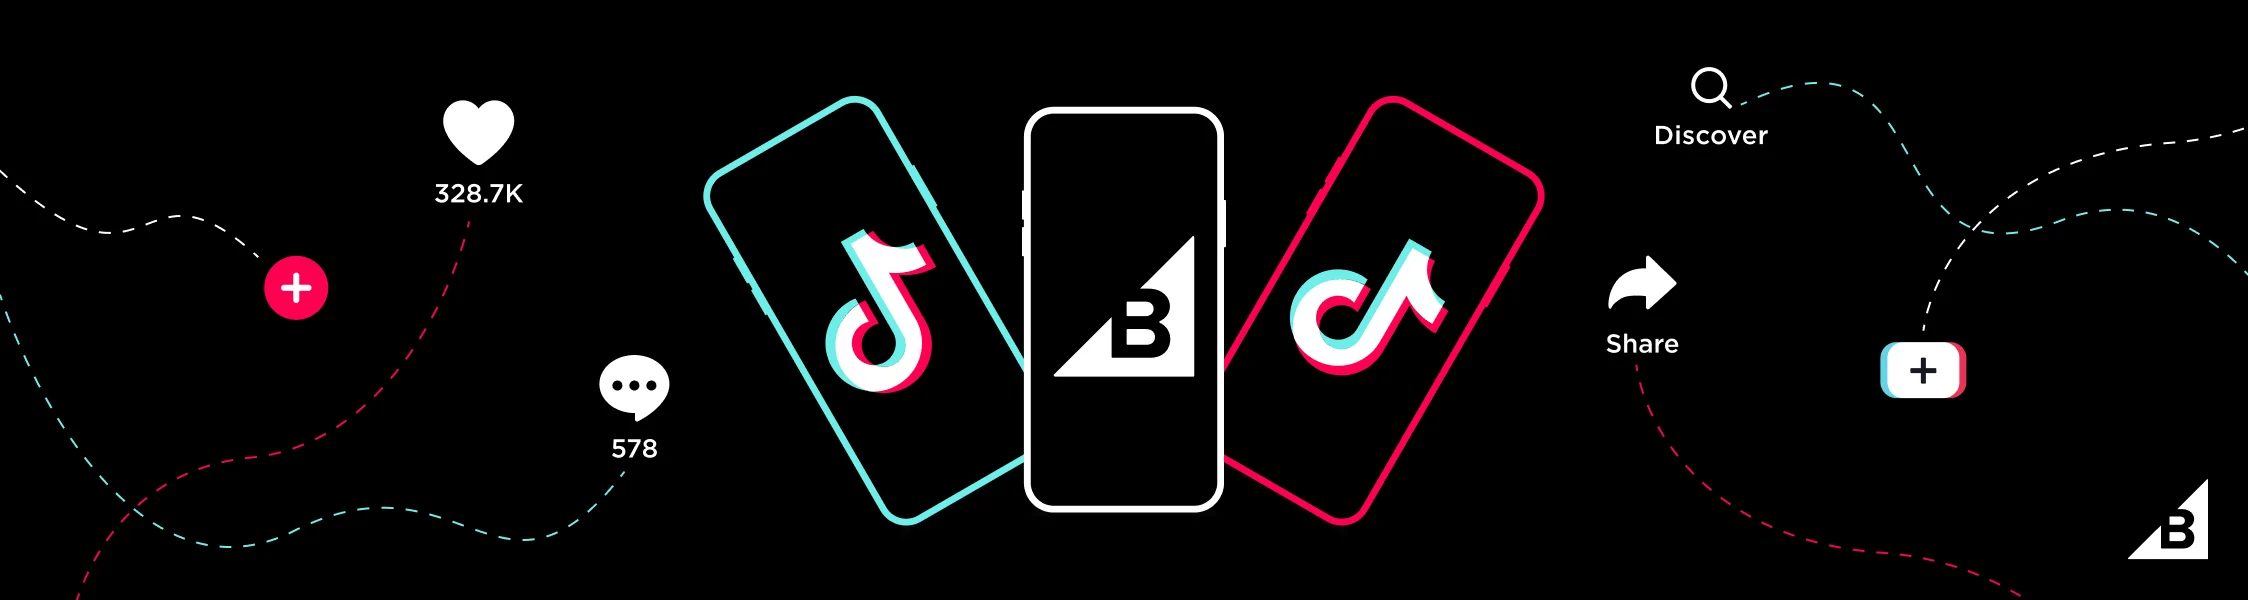 Advertisers Invest in TikTok Shops Despite Mixed Results